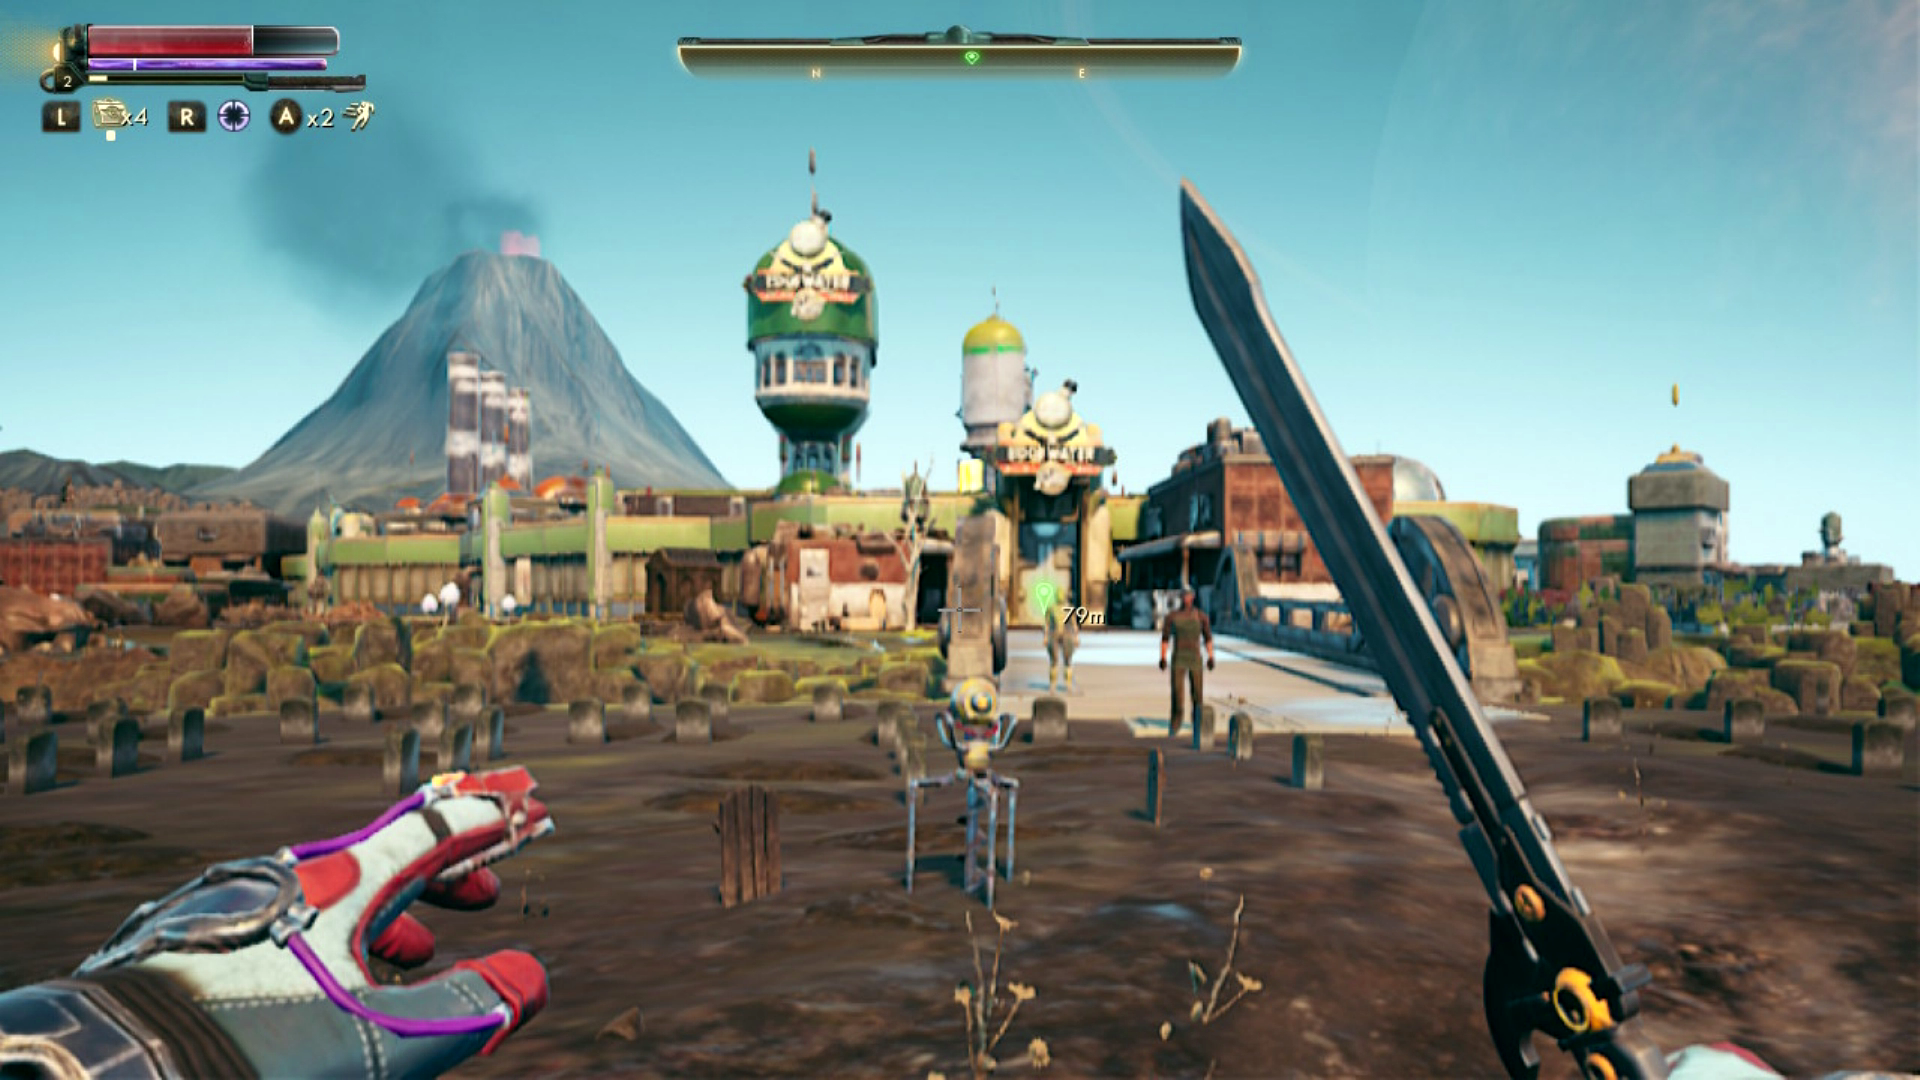 The Outer Worlds For Nintendo Switch Review - Cosmic Haze - GameSpot